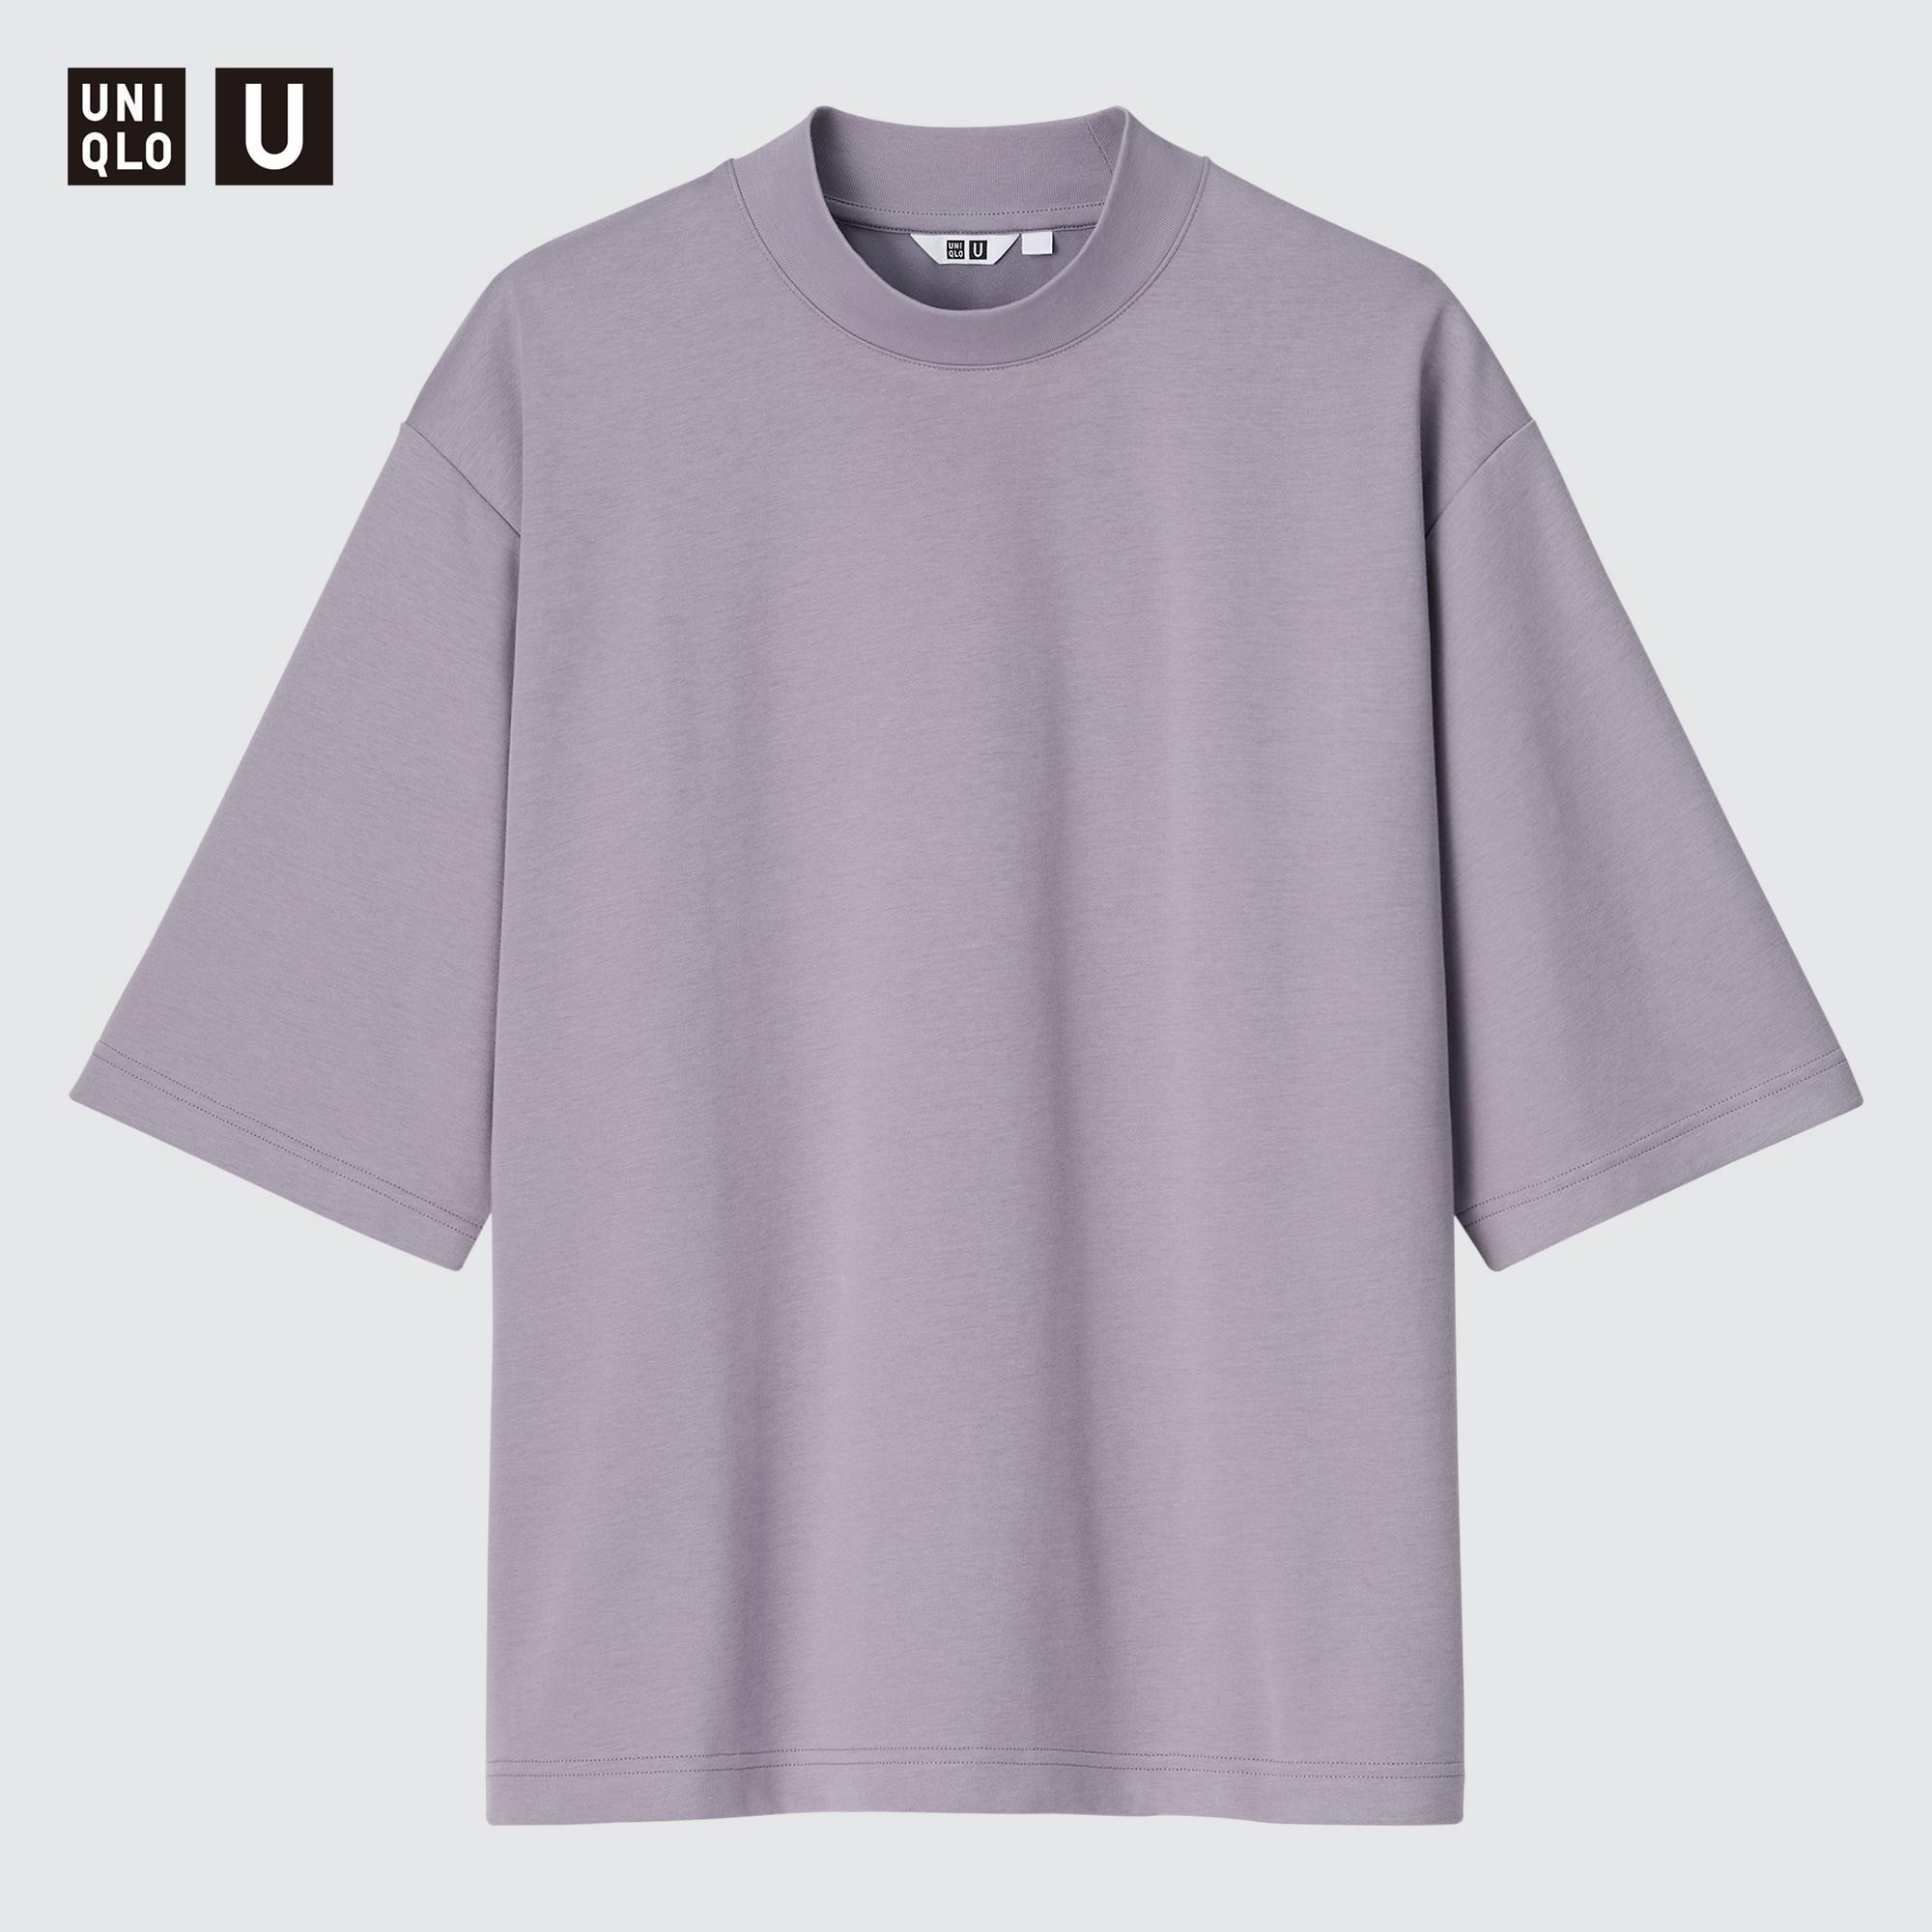 Oversized Mock Neck Tee BY230| Men's Plain cotton T-shirt with dropped  shoulders